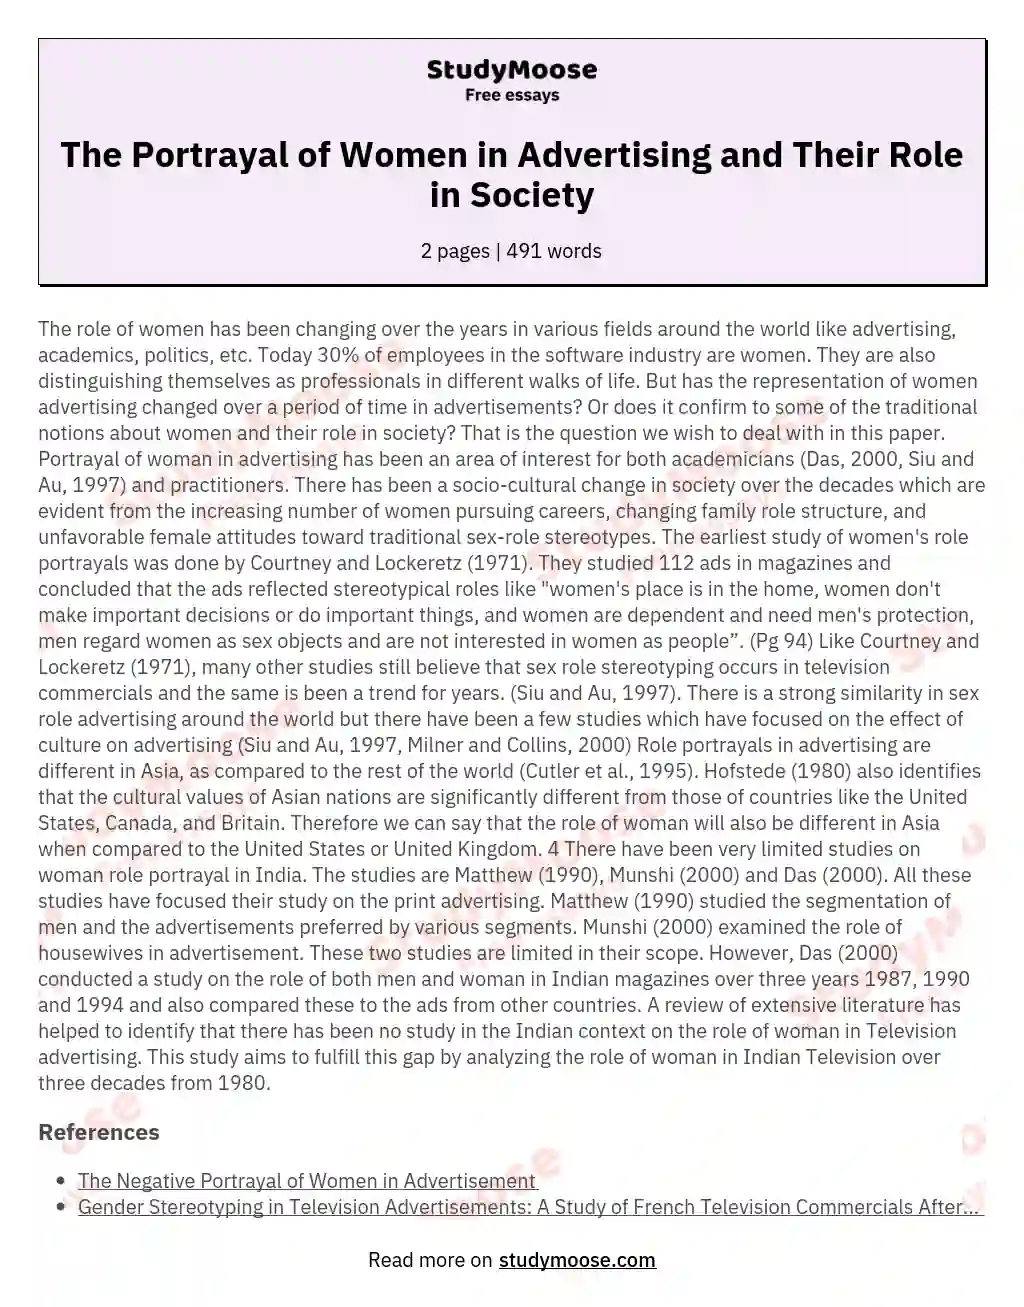 The Portrayal of Women in Advertising and Their Role in Society essay